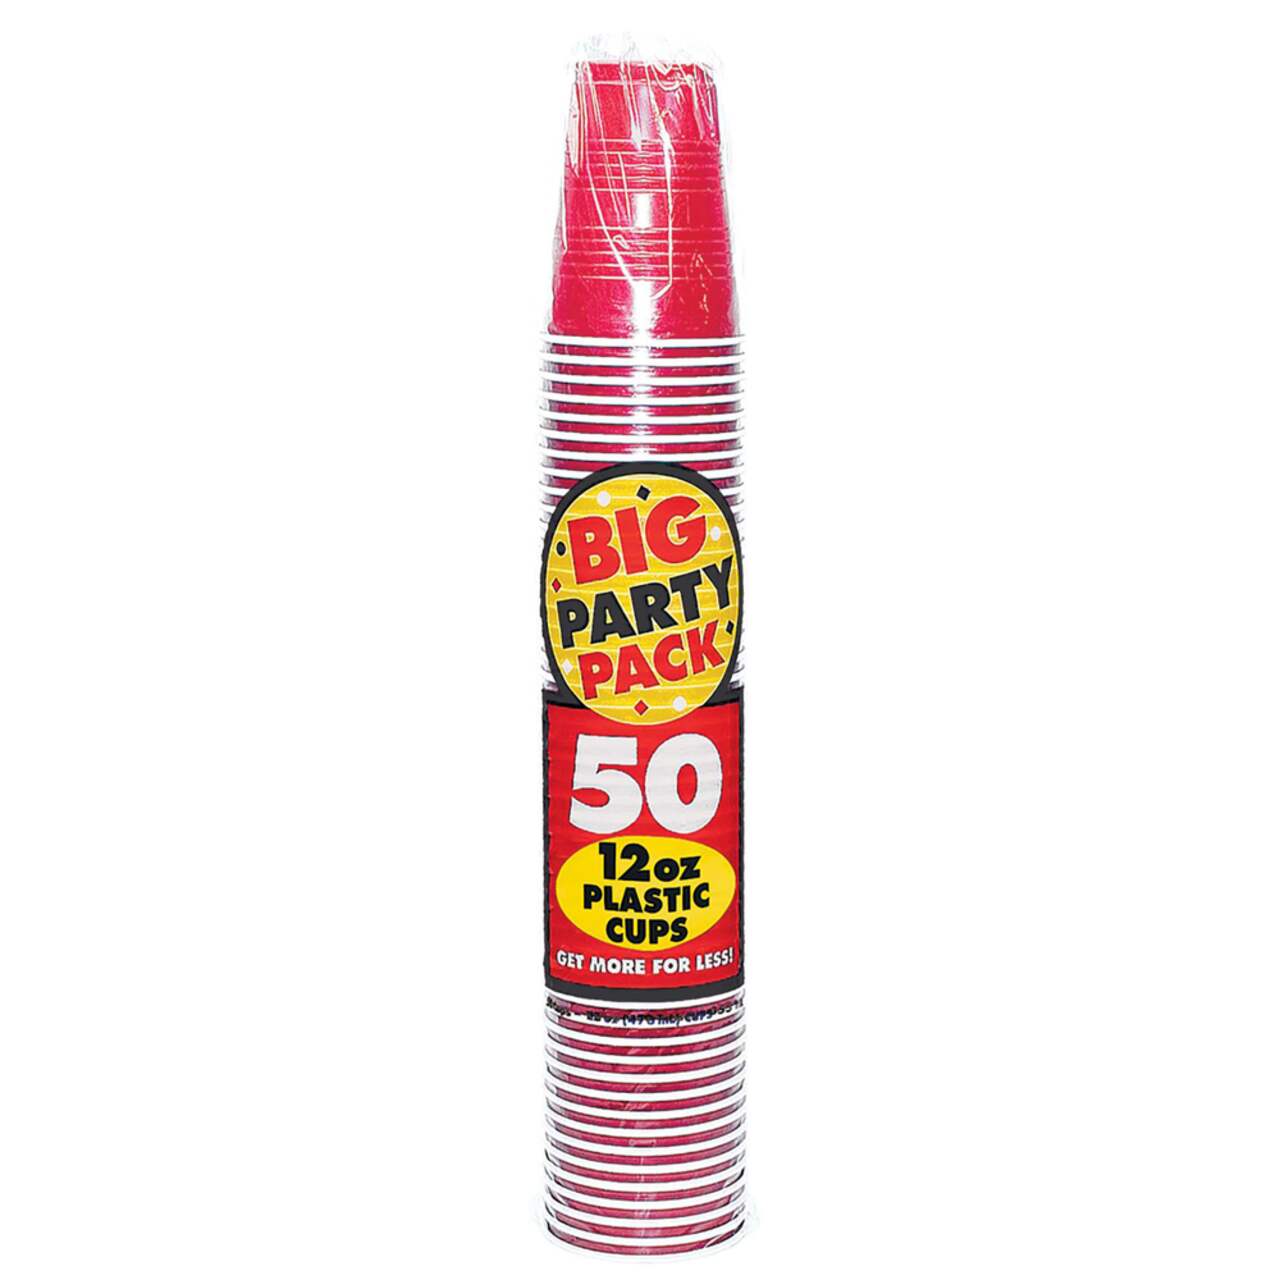 Glad Everyday Disposable Plastic Cups for Everyday Use  Red Plastic Cups  Strong and Sturdy Red Plastic Party Cups for All Occasions, 16 Oz Cups (100  Count) 16 oz - 100 Count